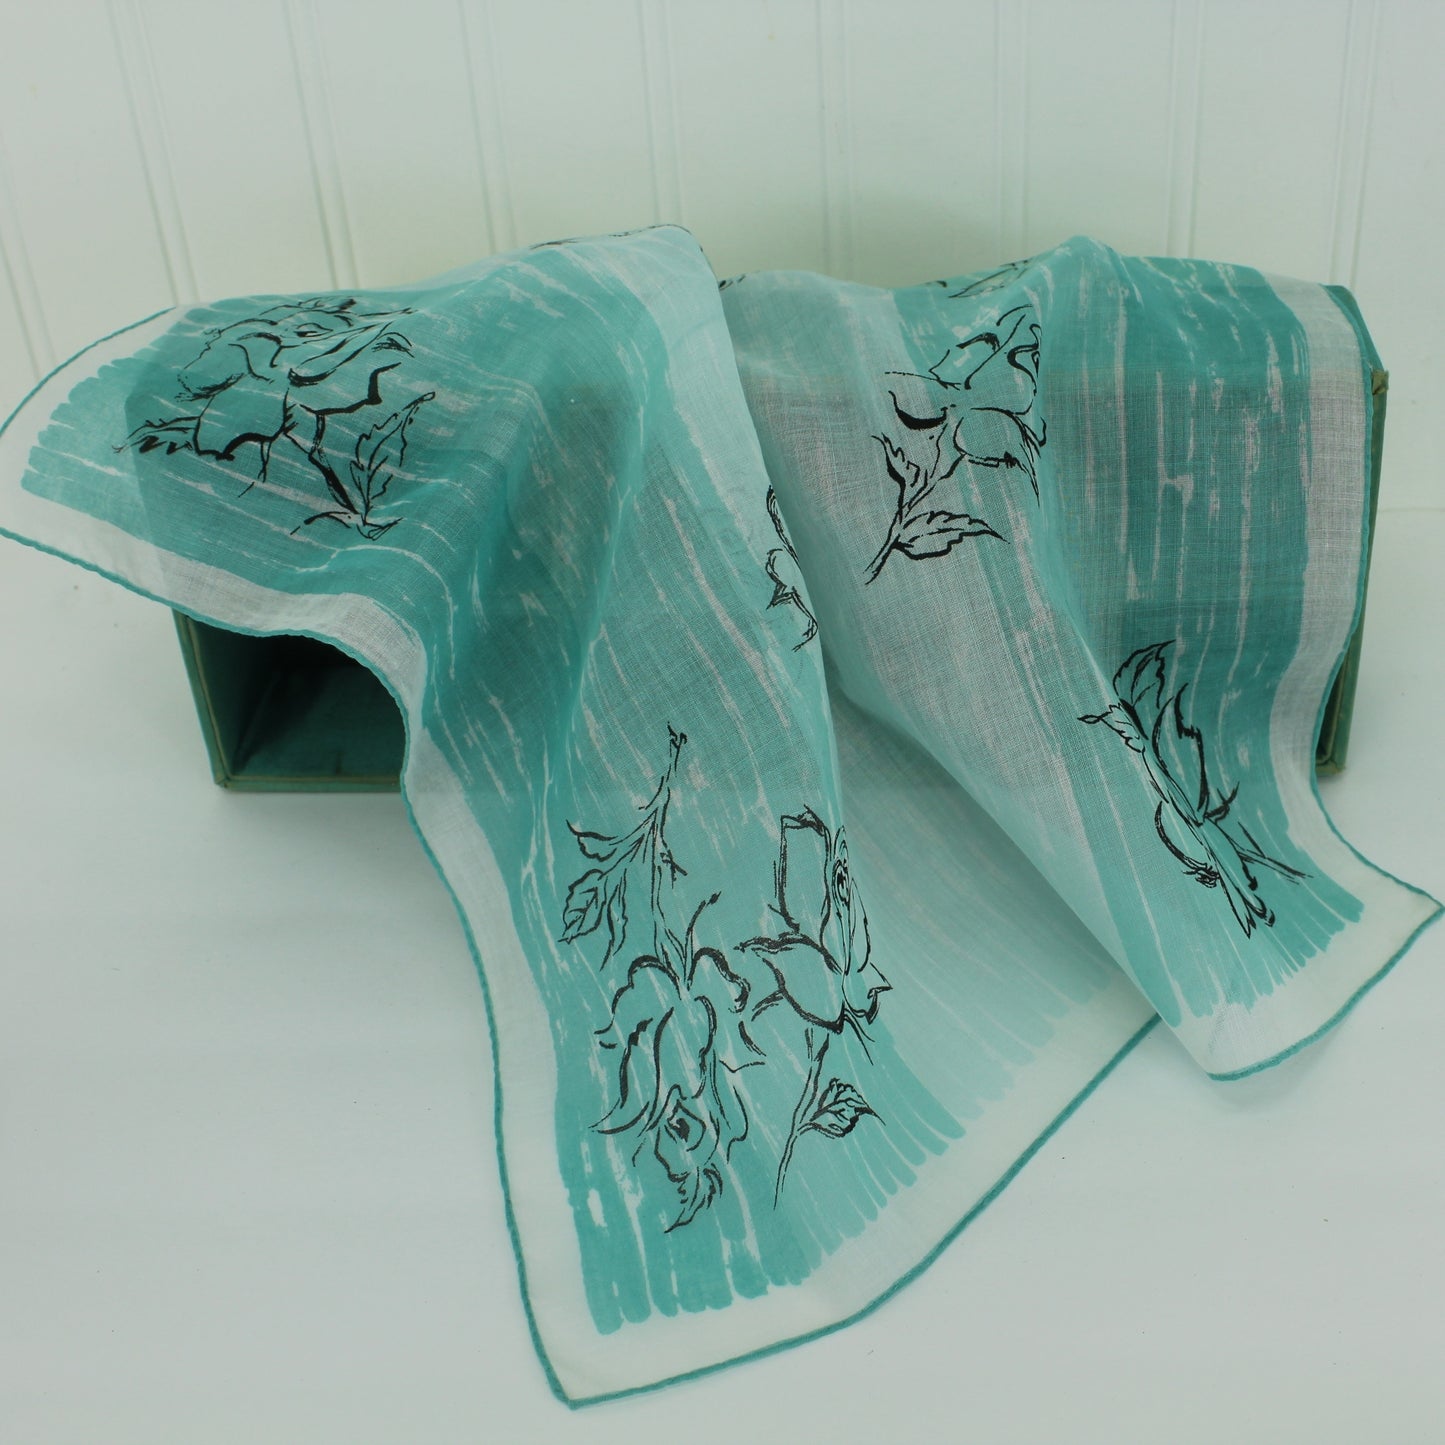 Collection 3 Handkerchiefs Deco Tat Edge Use or DIY Clothing Repurpose Crafts large lovely color aqua with roses